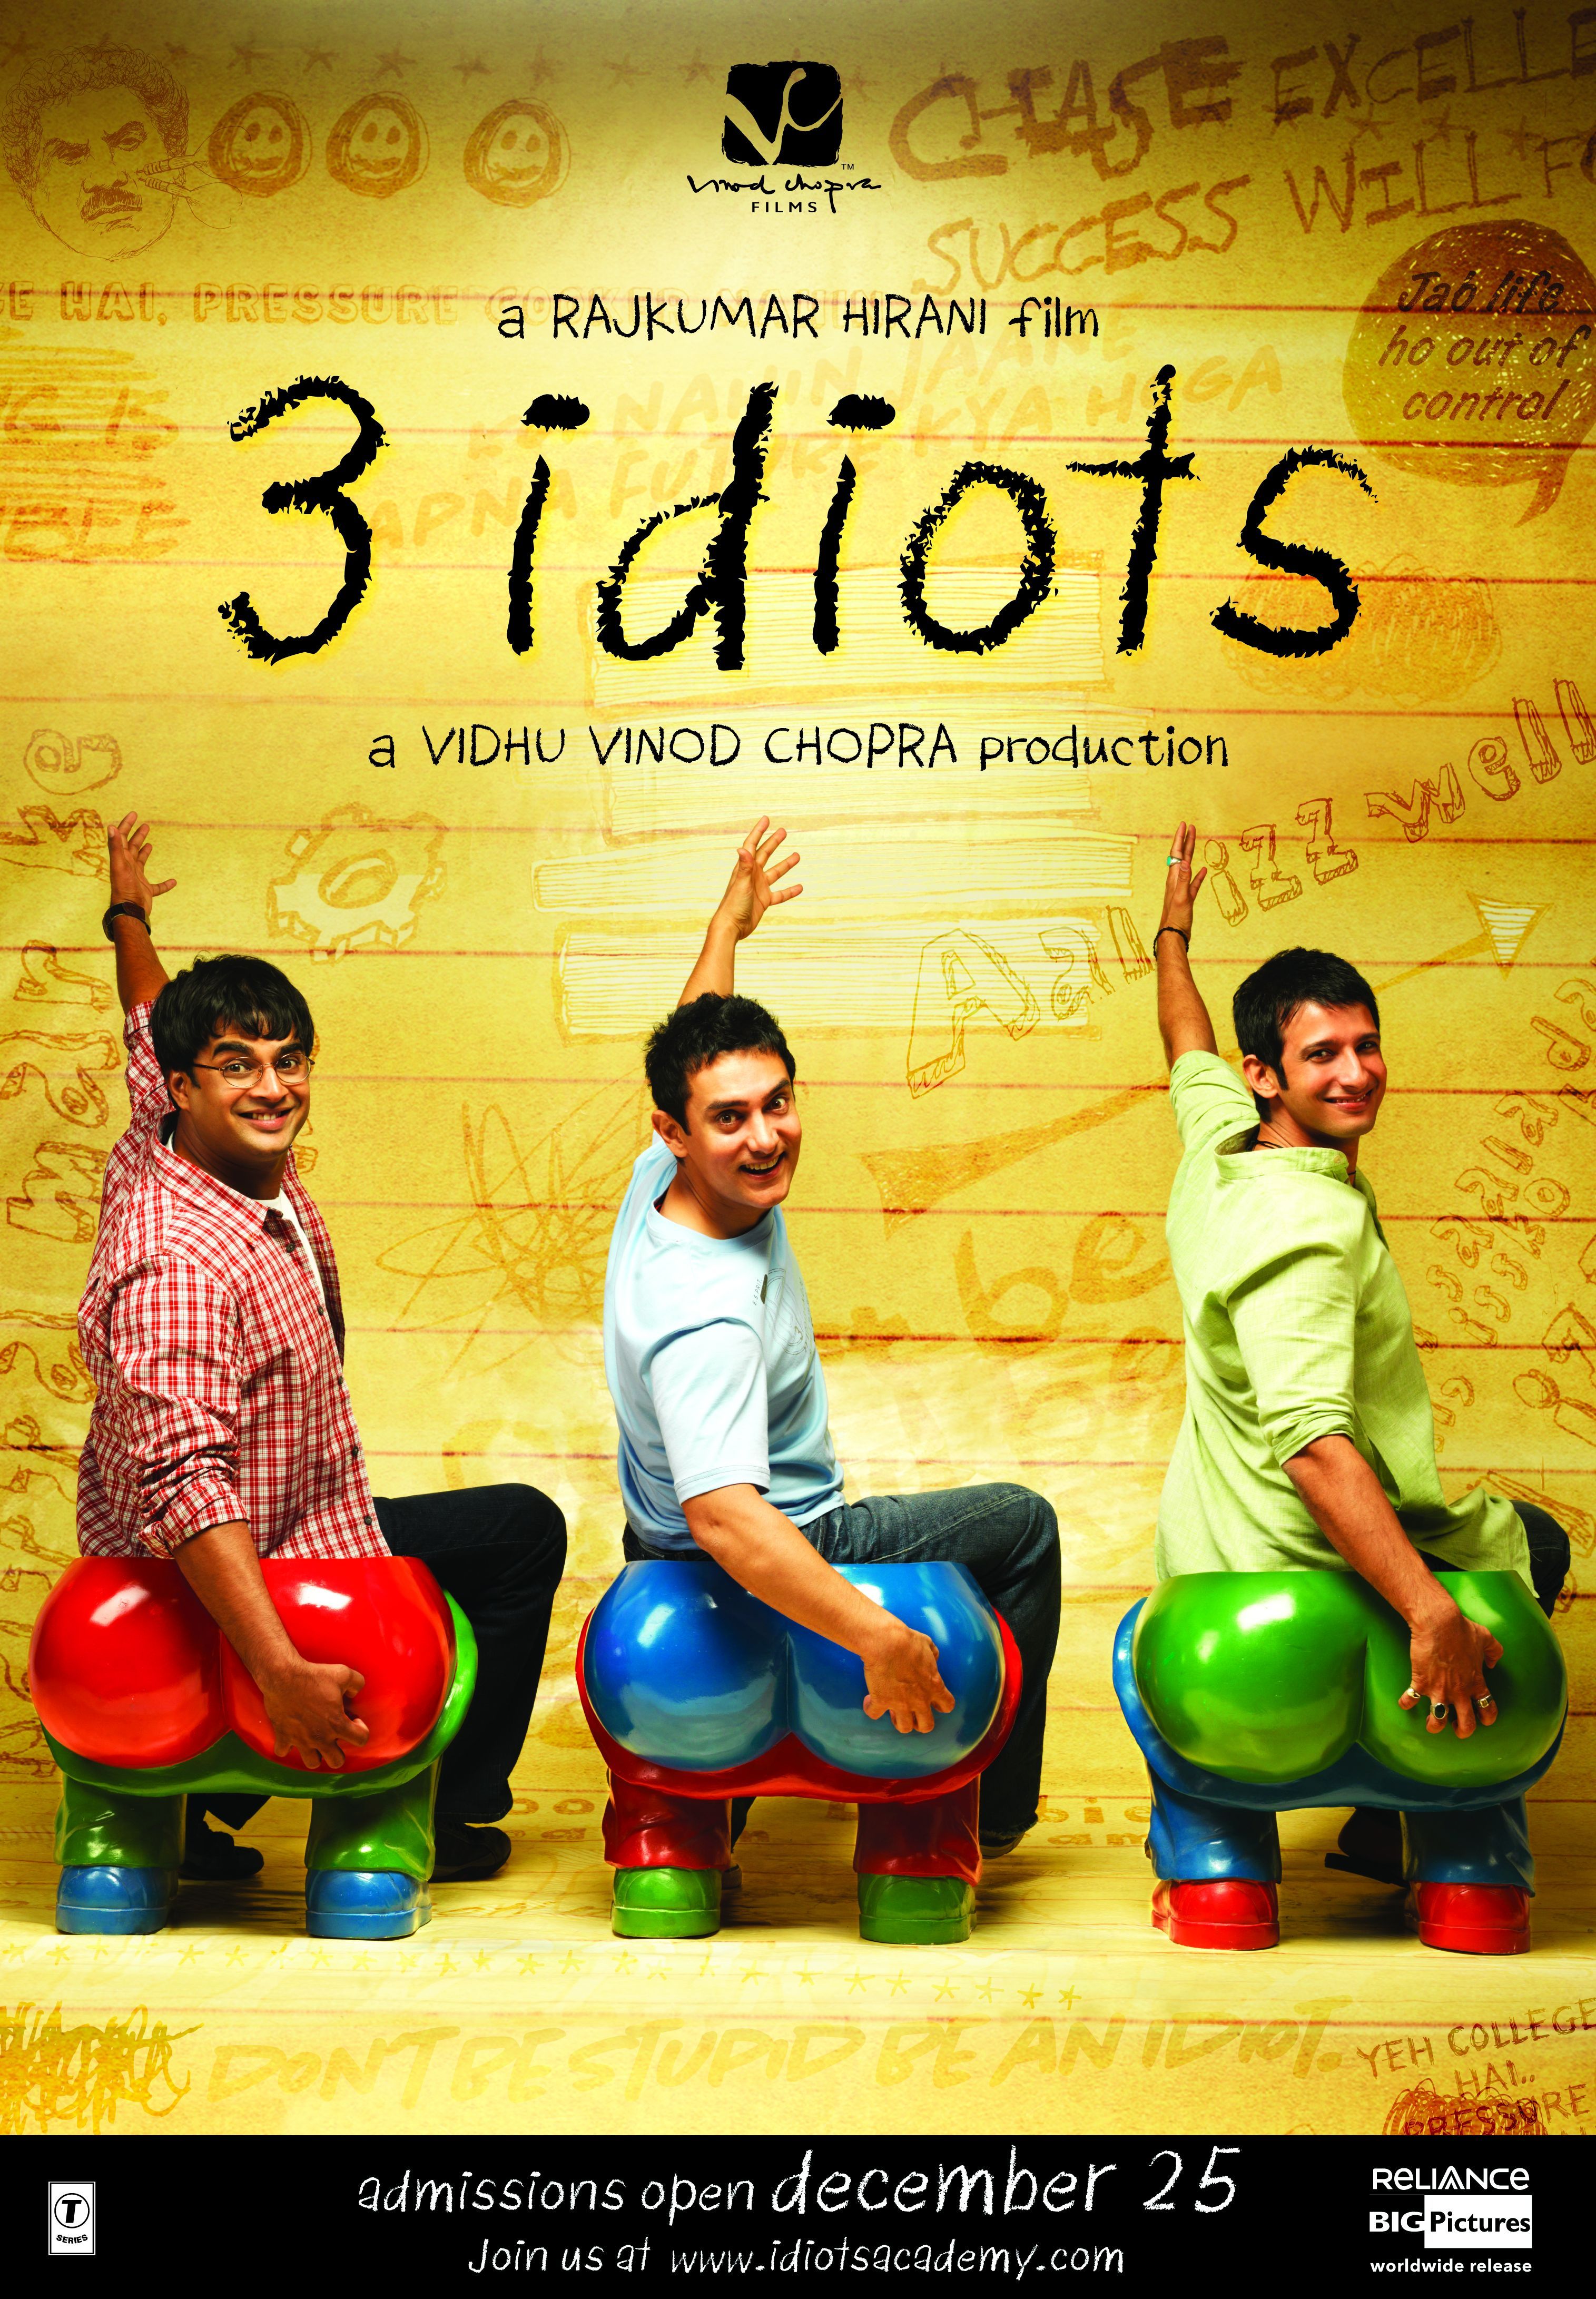 Who is the director of 3 Idiots?